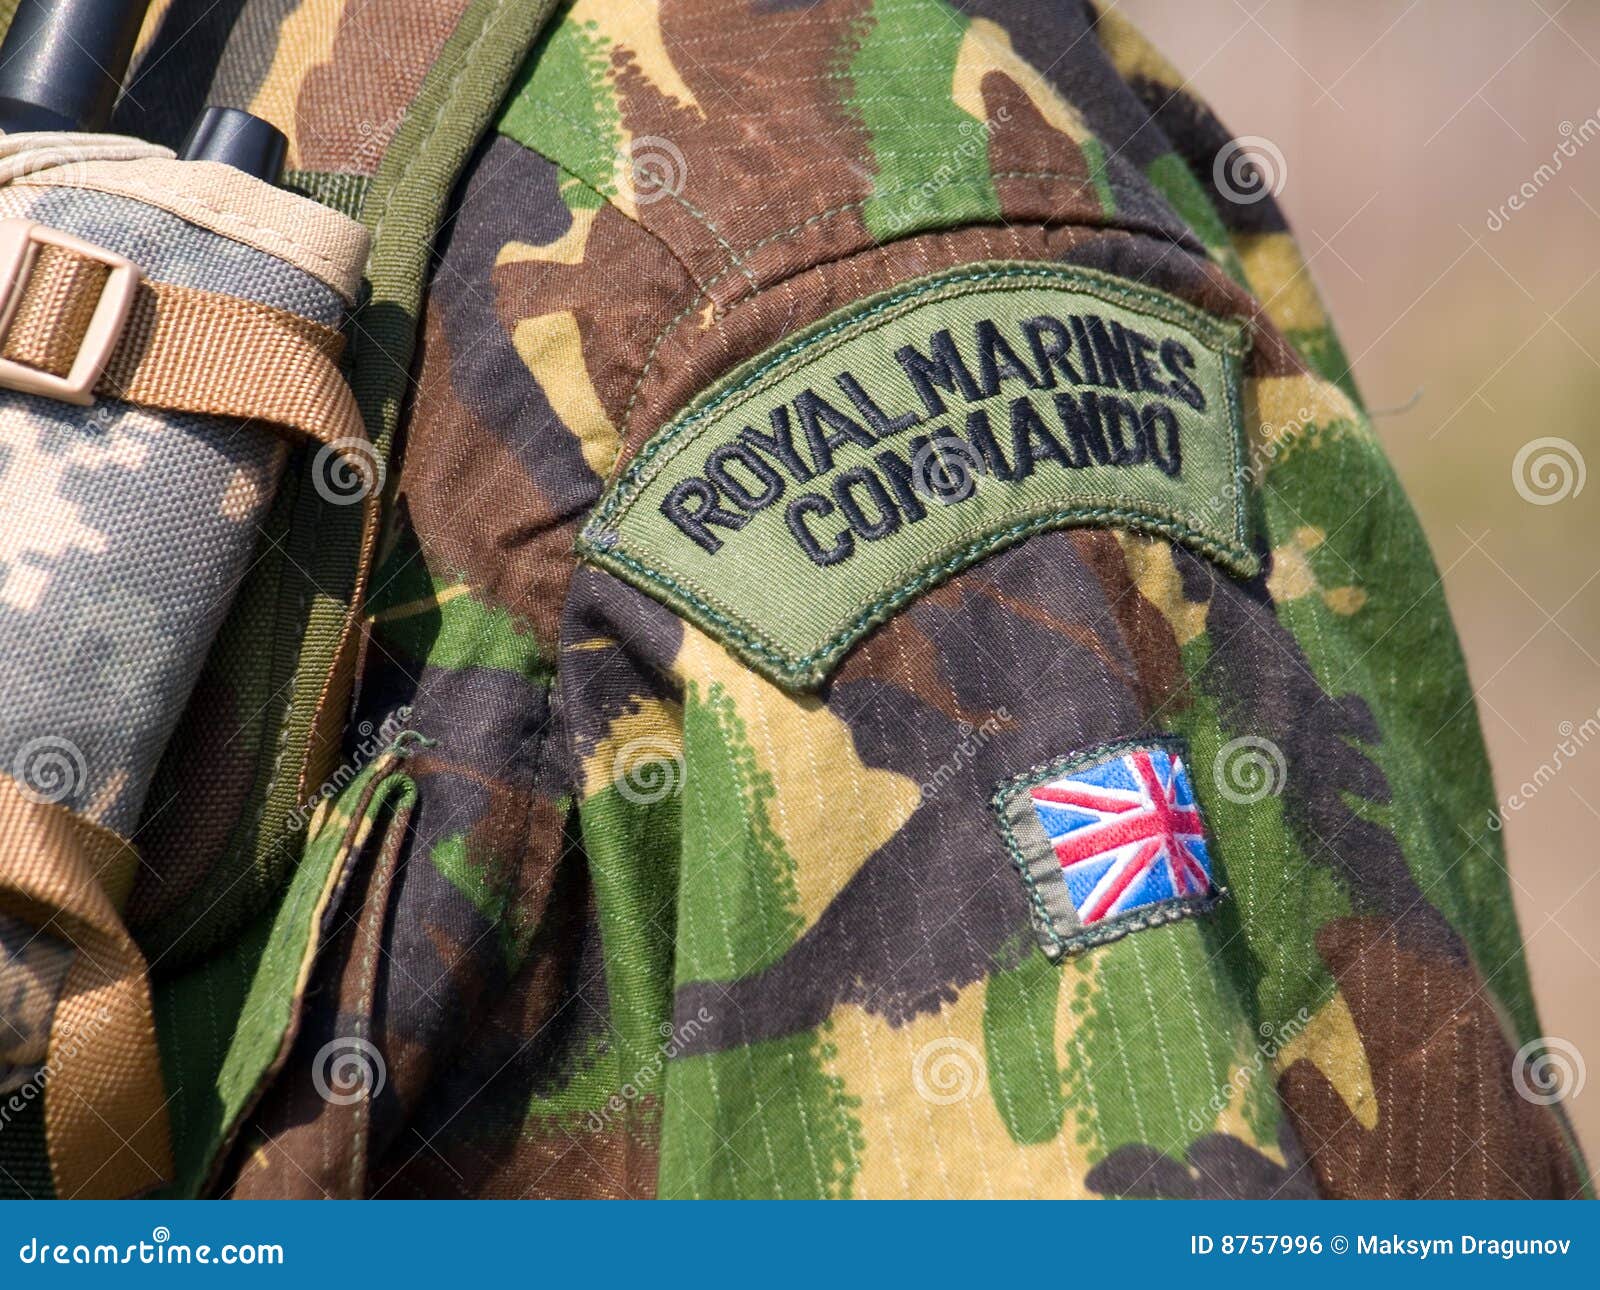 How long is a royal marines contract?